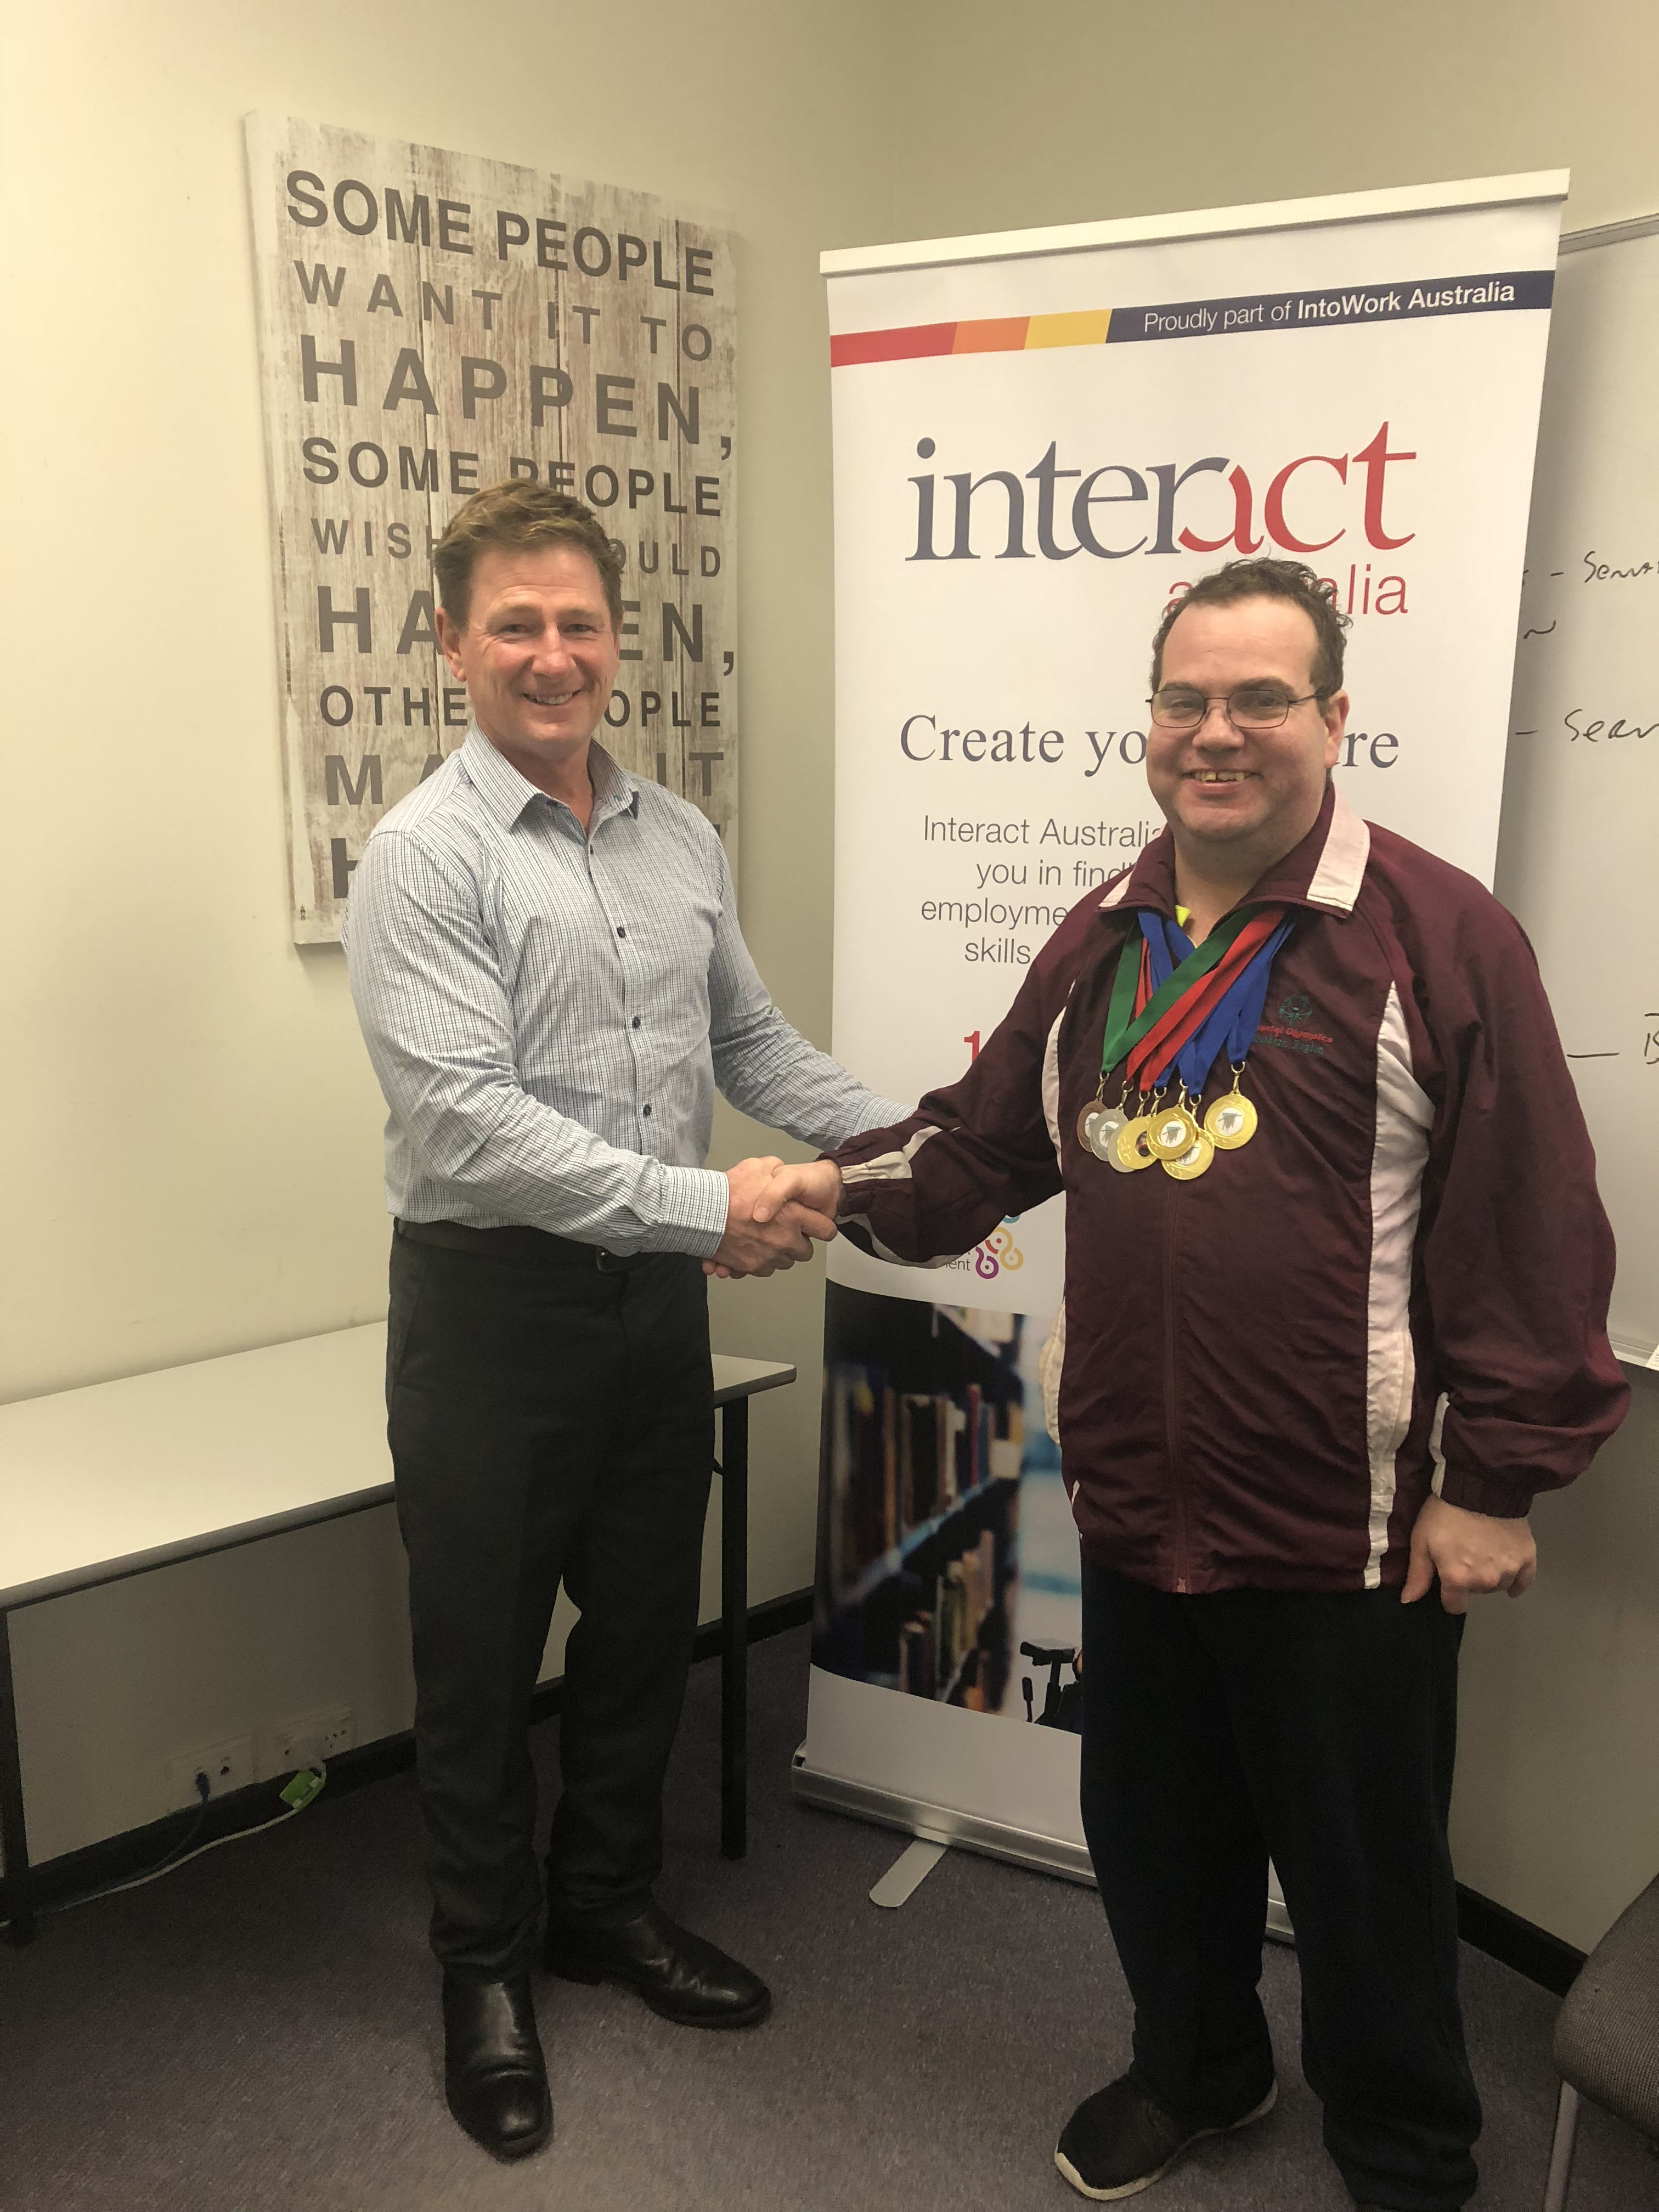 Darryn Perry, Interact Australia’s Performance and Partnership Leader in Hobart, is proudly pictured here with Tom who has donned the 7 medals (4 gold, 2 silvers and 1 bronze) he won at the recent Tenpin Bowling Australia disability championships.